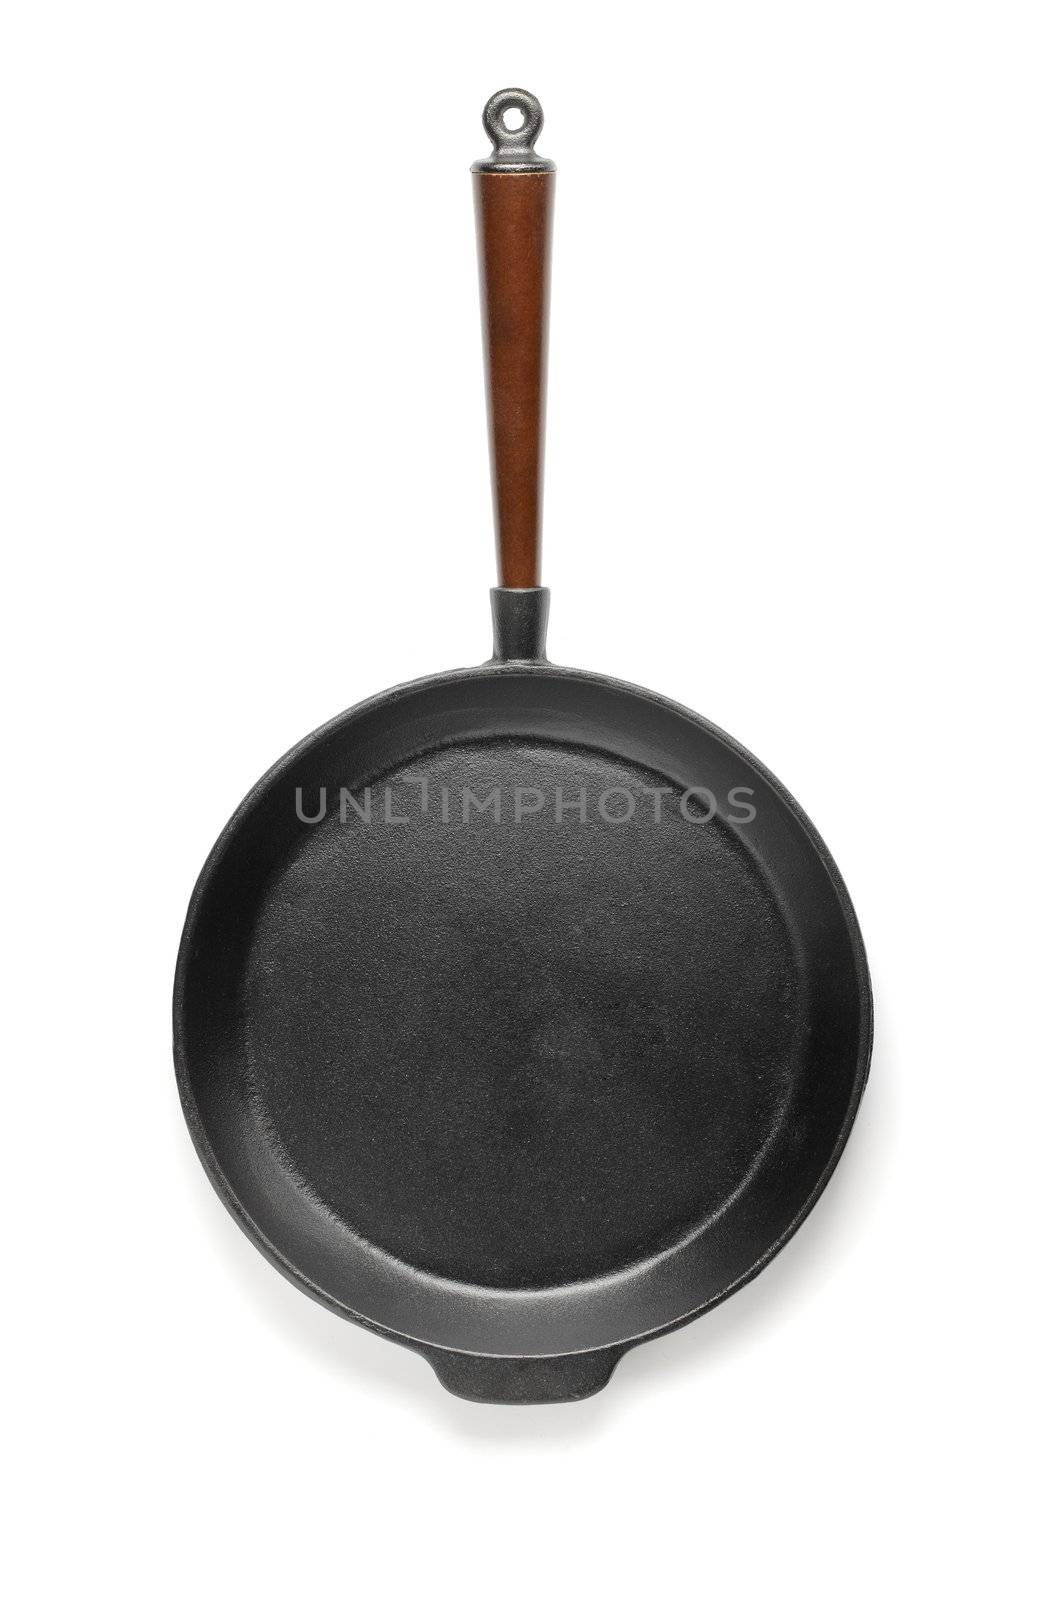 Old fashioned cast iron frying pan isolated on white with natural shadows.